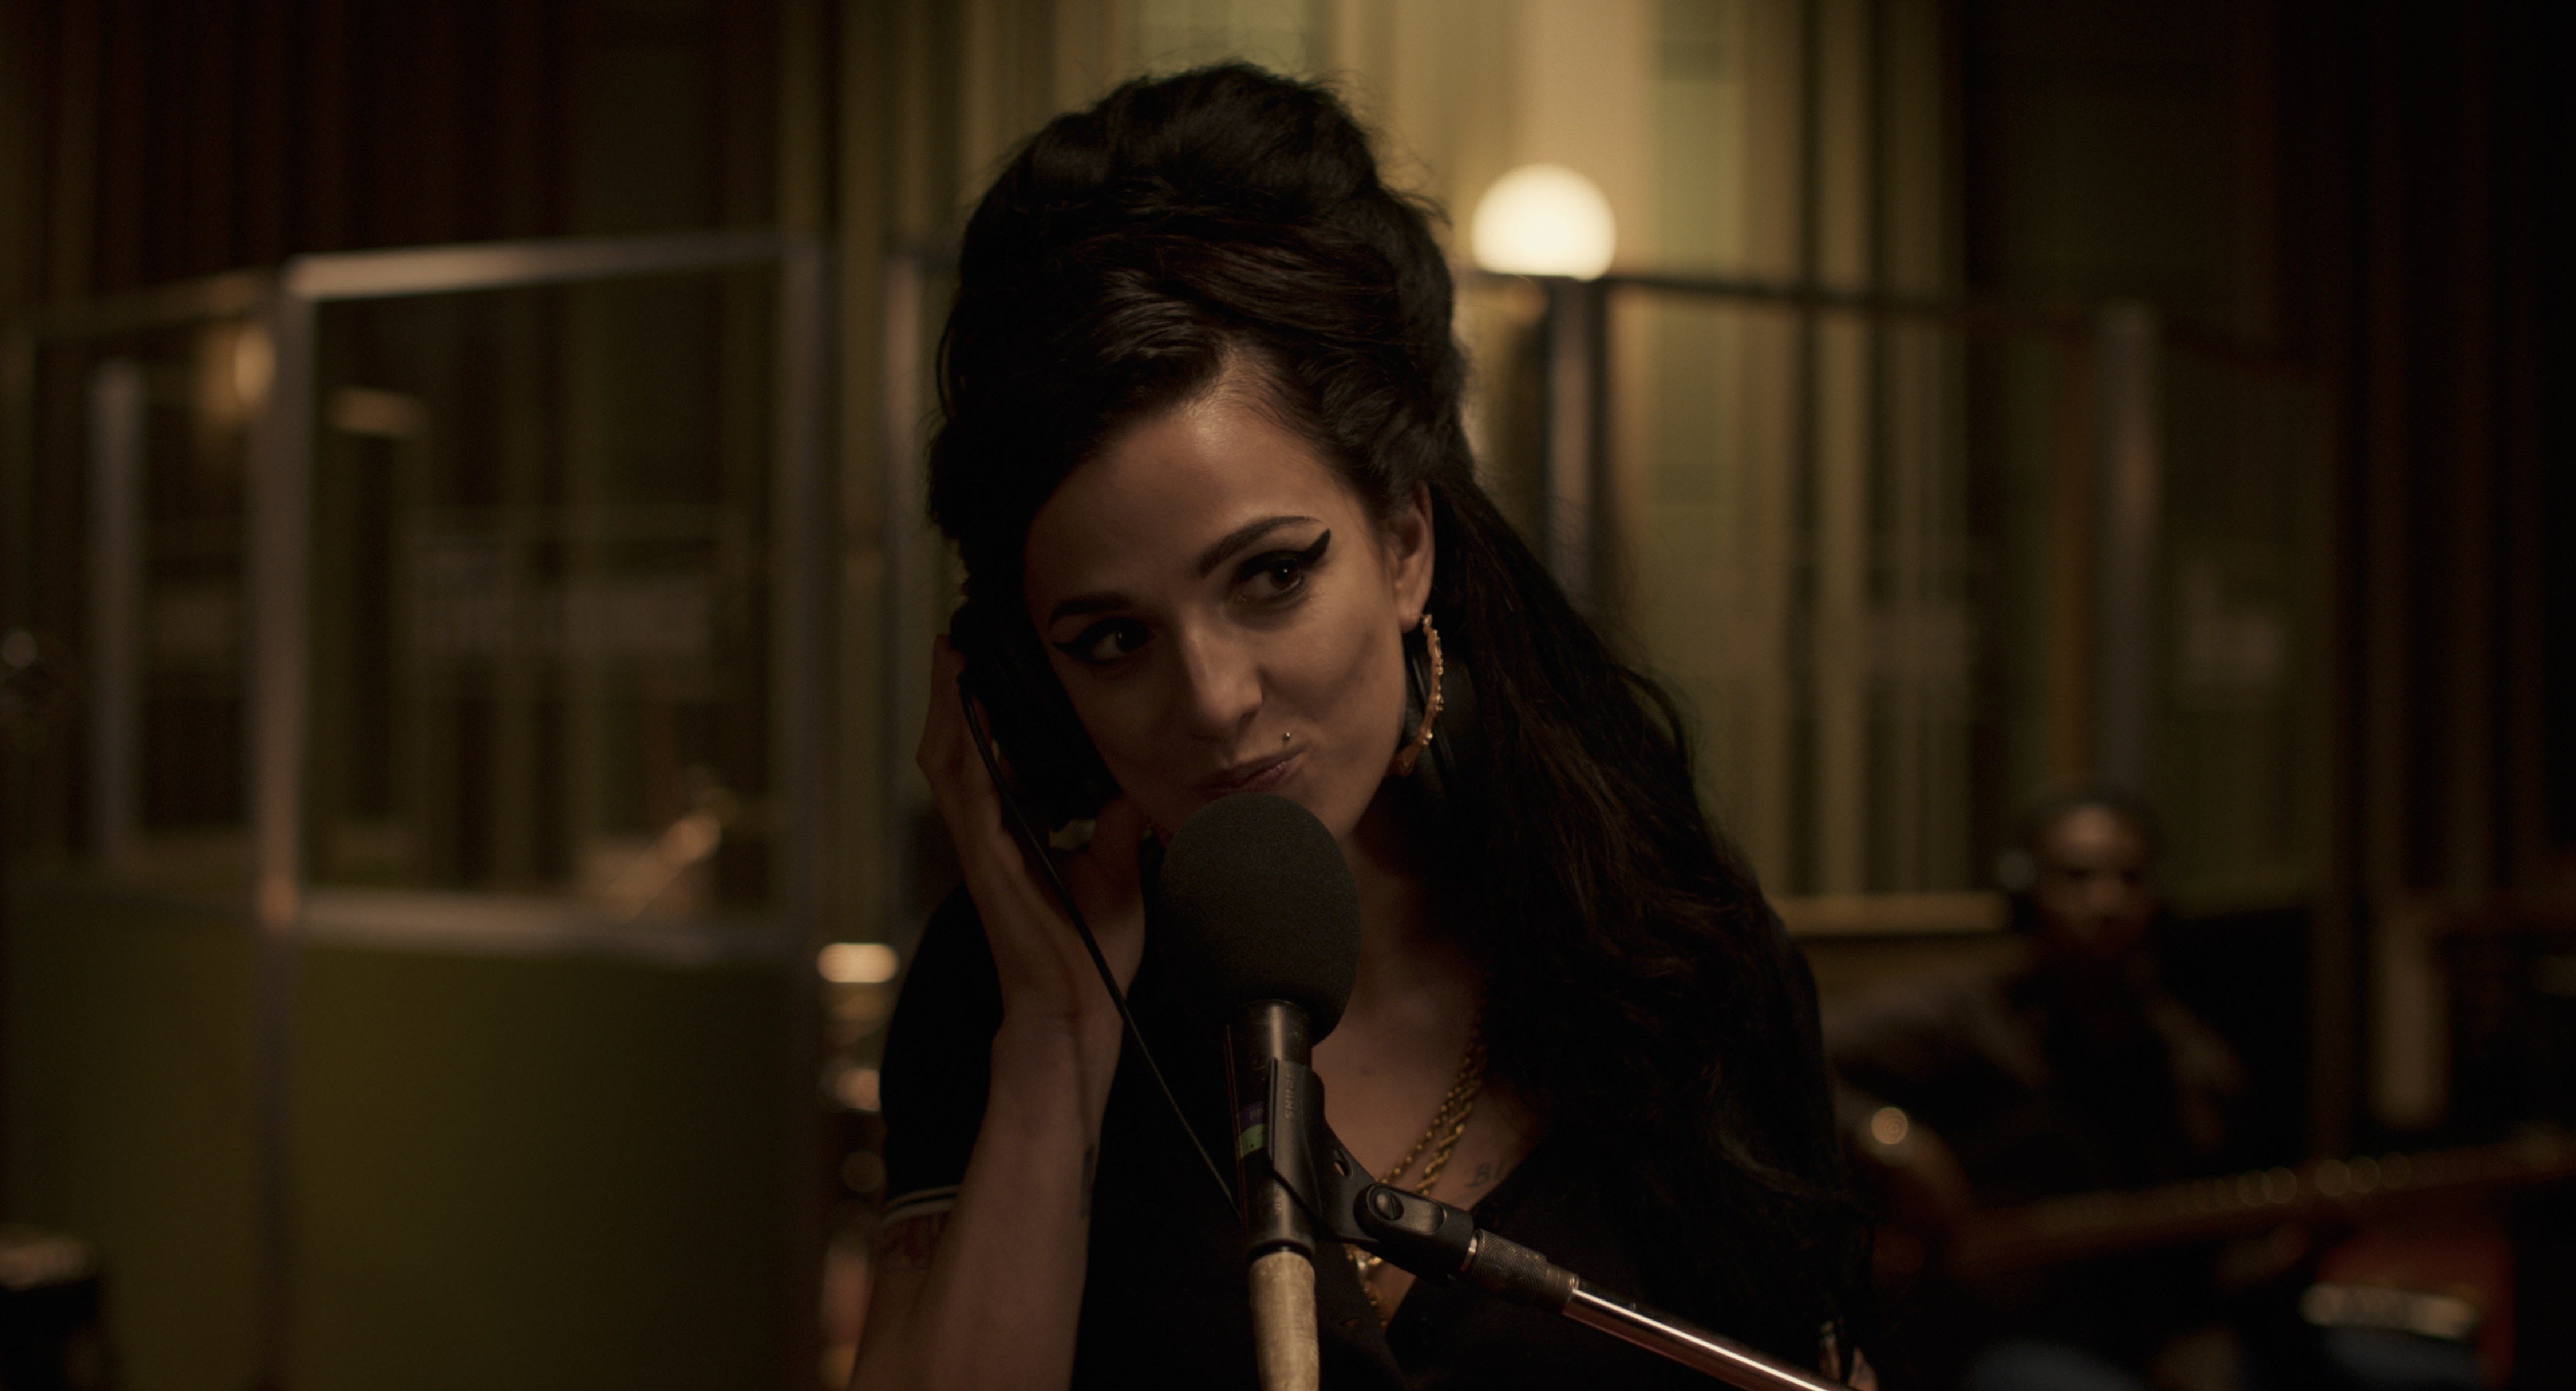 'Back to Black': Marisa Abela suits up to uncannily portray Amy Winehouse in 2024 movie